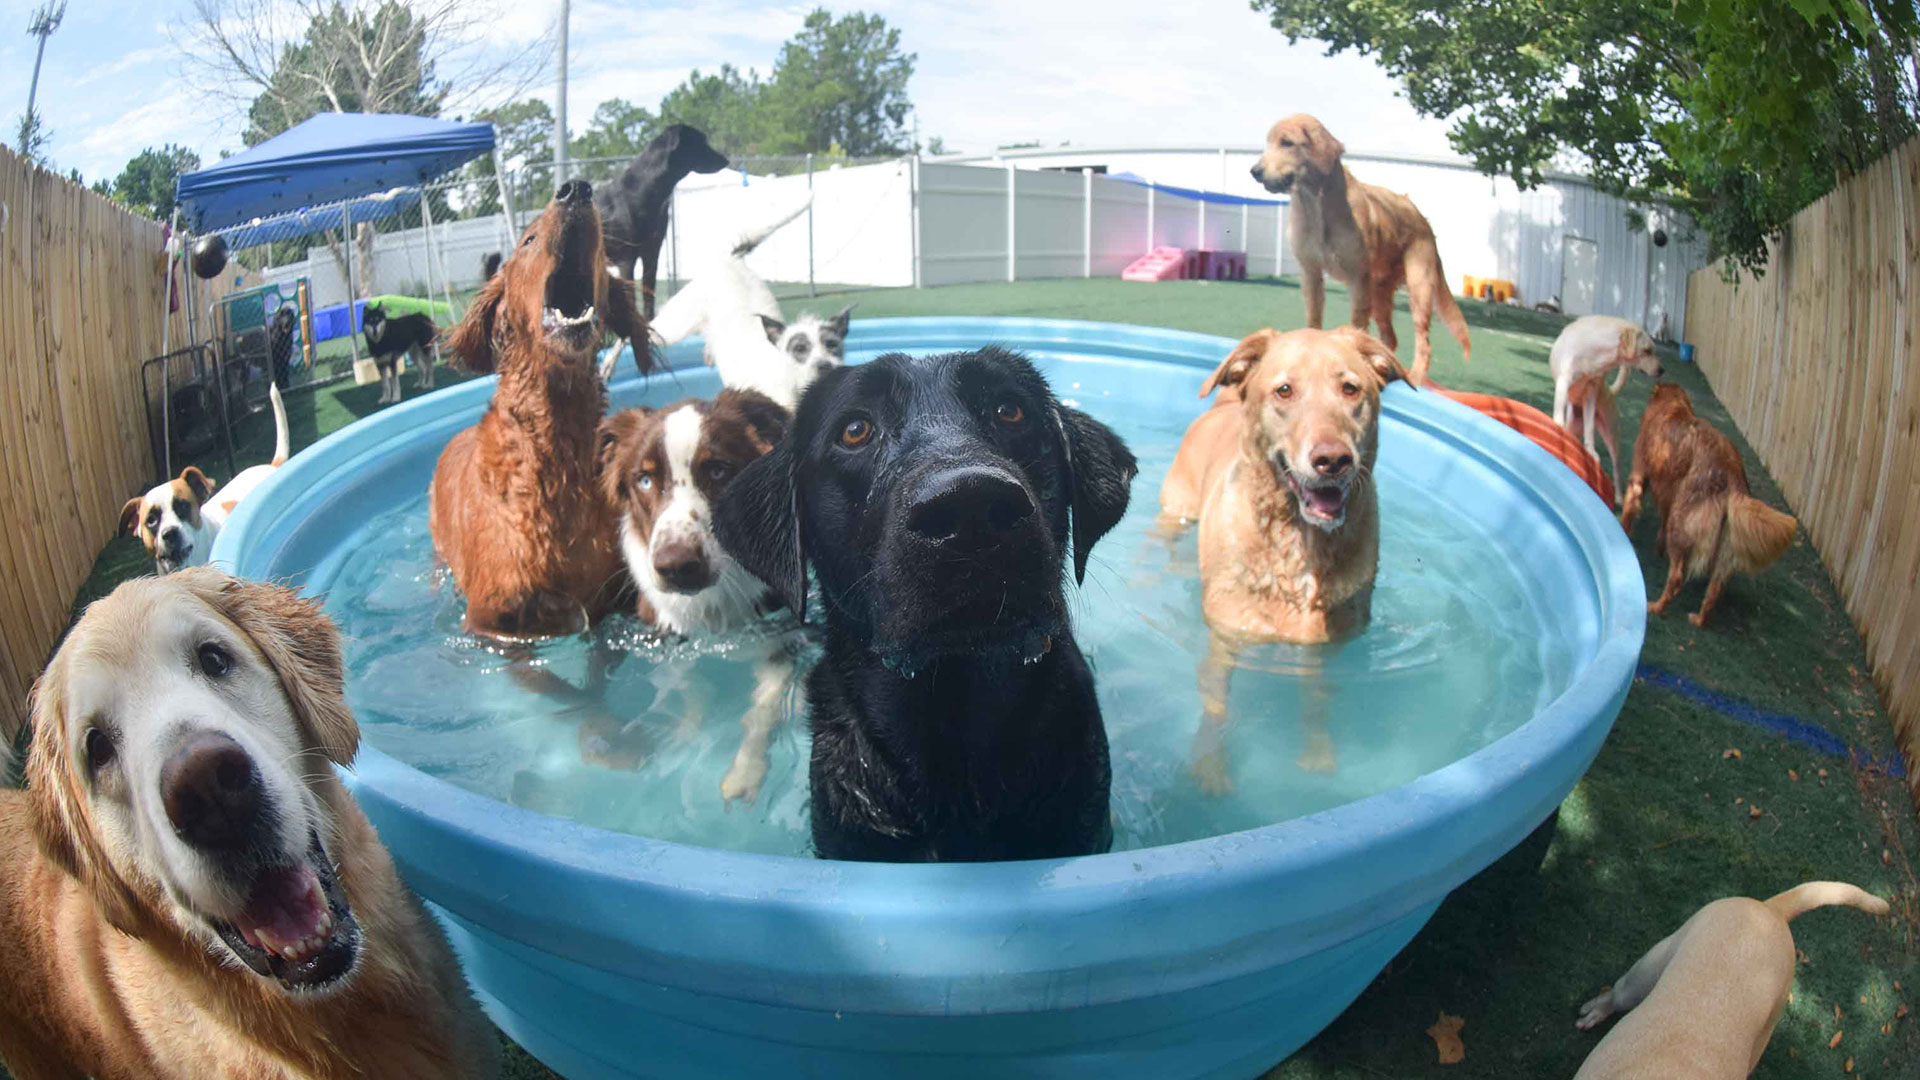 Dogs playing in a kiddie pool at Dagny and Dexter's